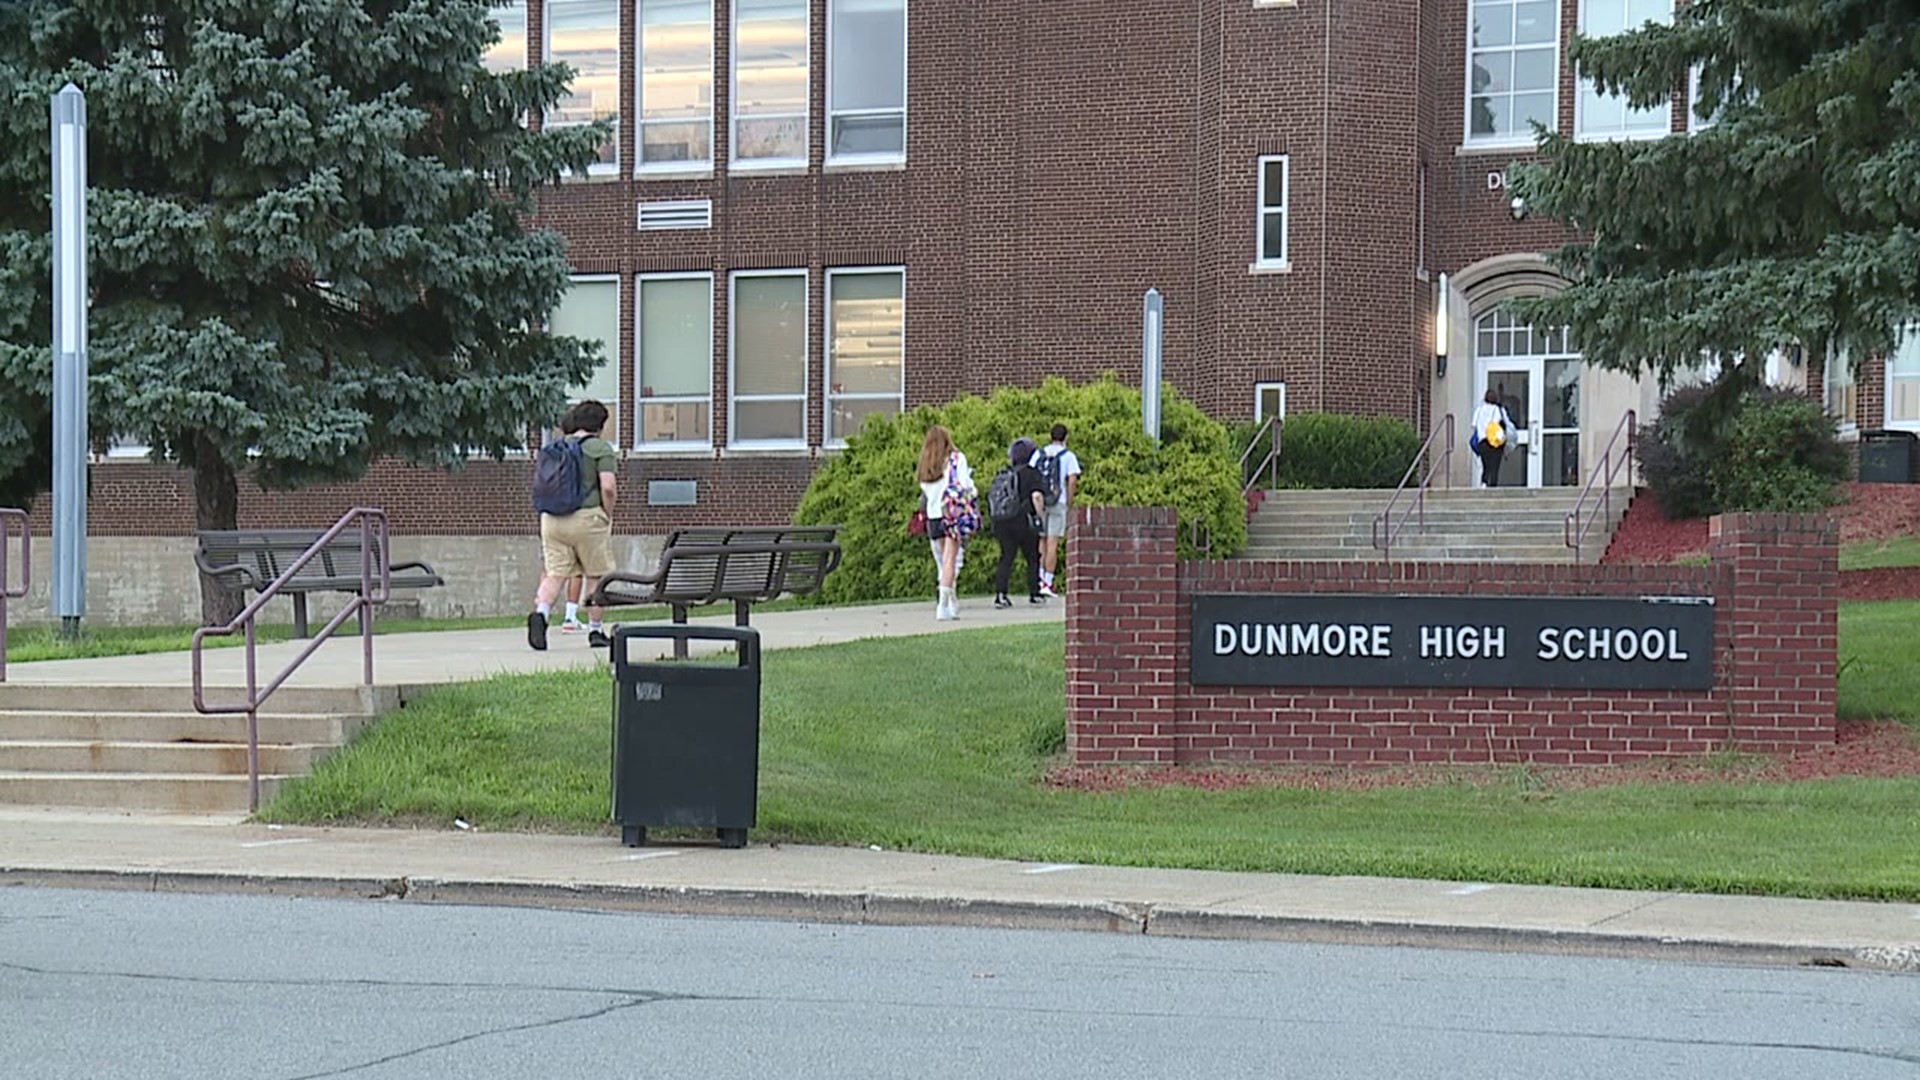 Four students who conspired to carry out a mass casualty attack on Dunmore High School were charged in Sept. 2021. One of them just admitted to two crimes.